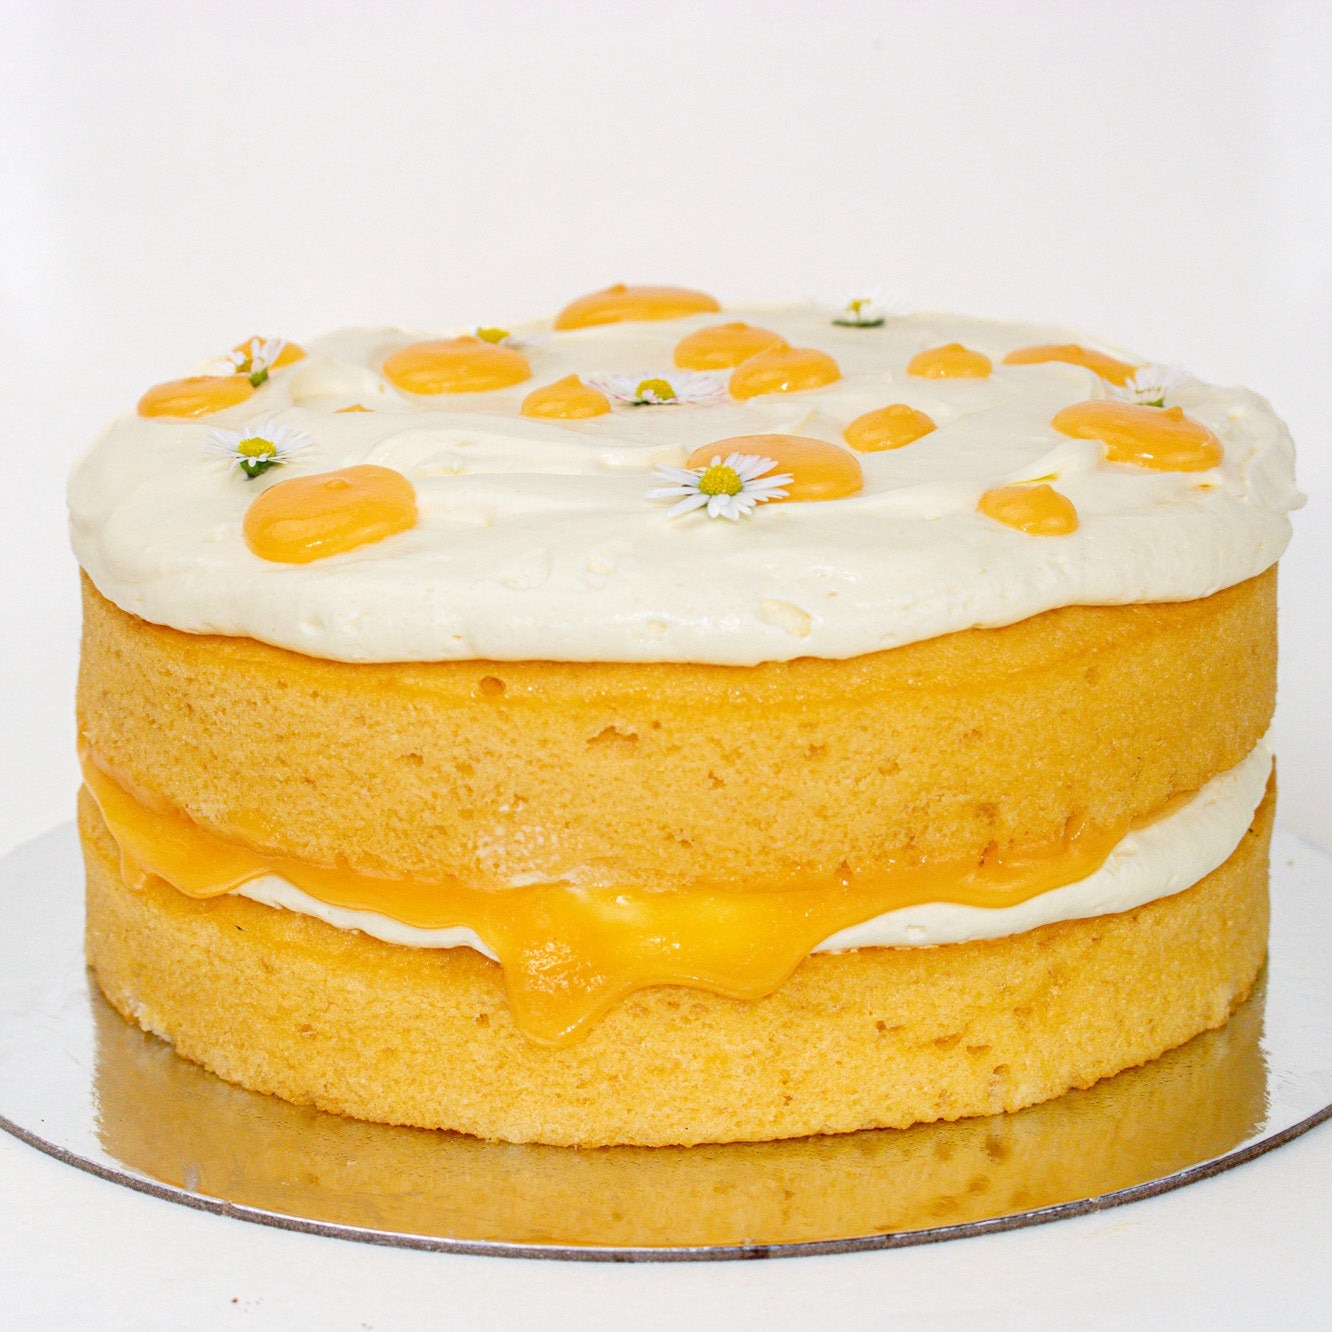 image of a two tiered lemon cake with white mascarpone icing and yellow lemon curd